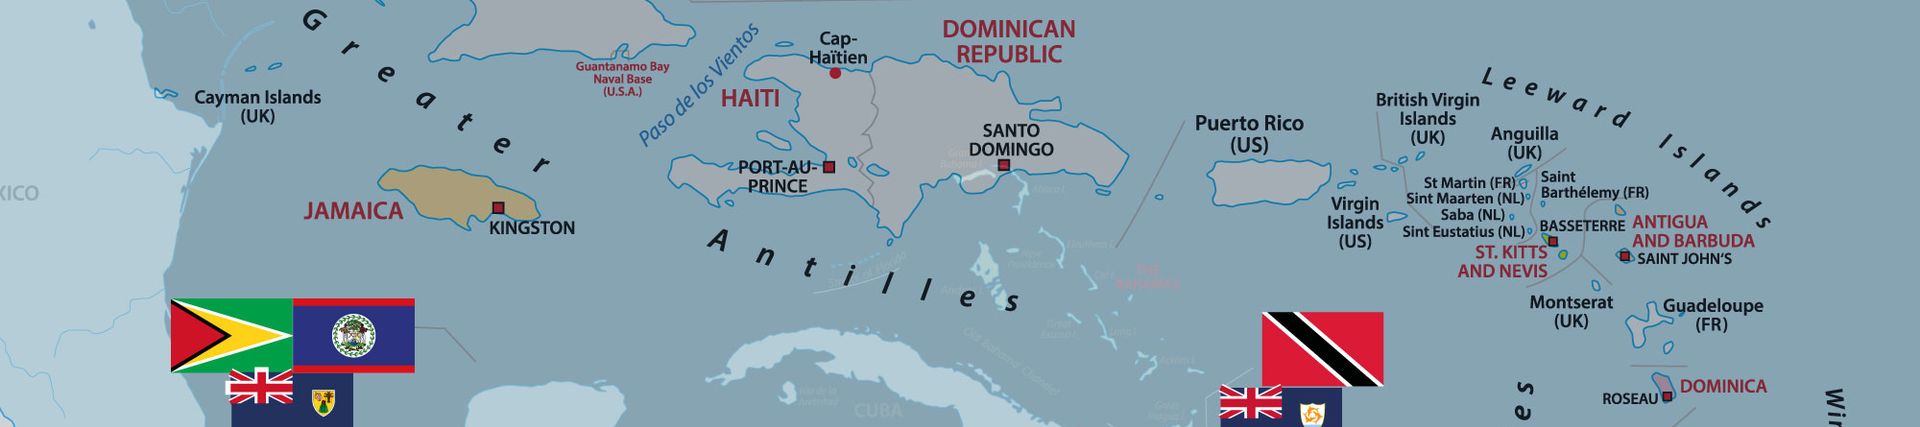 Map of the Caribbean with flags